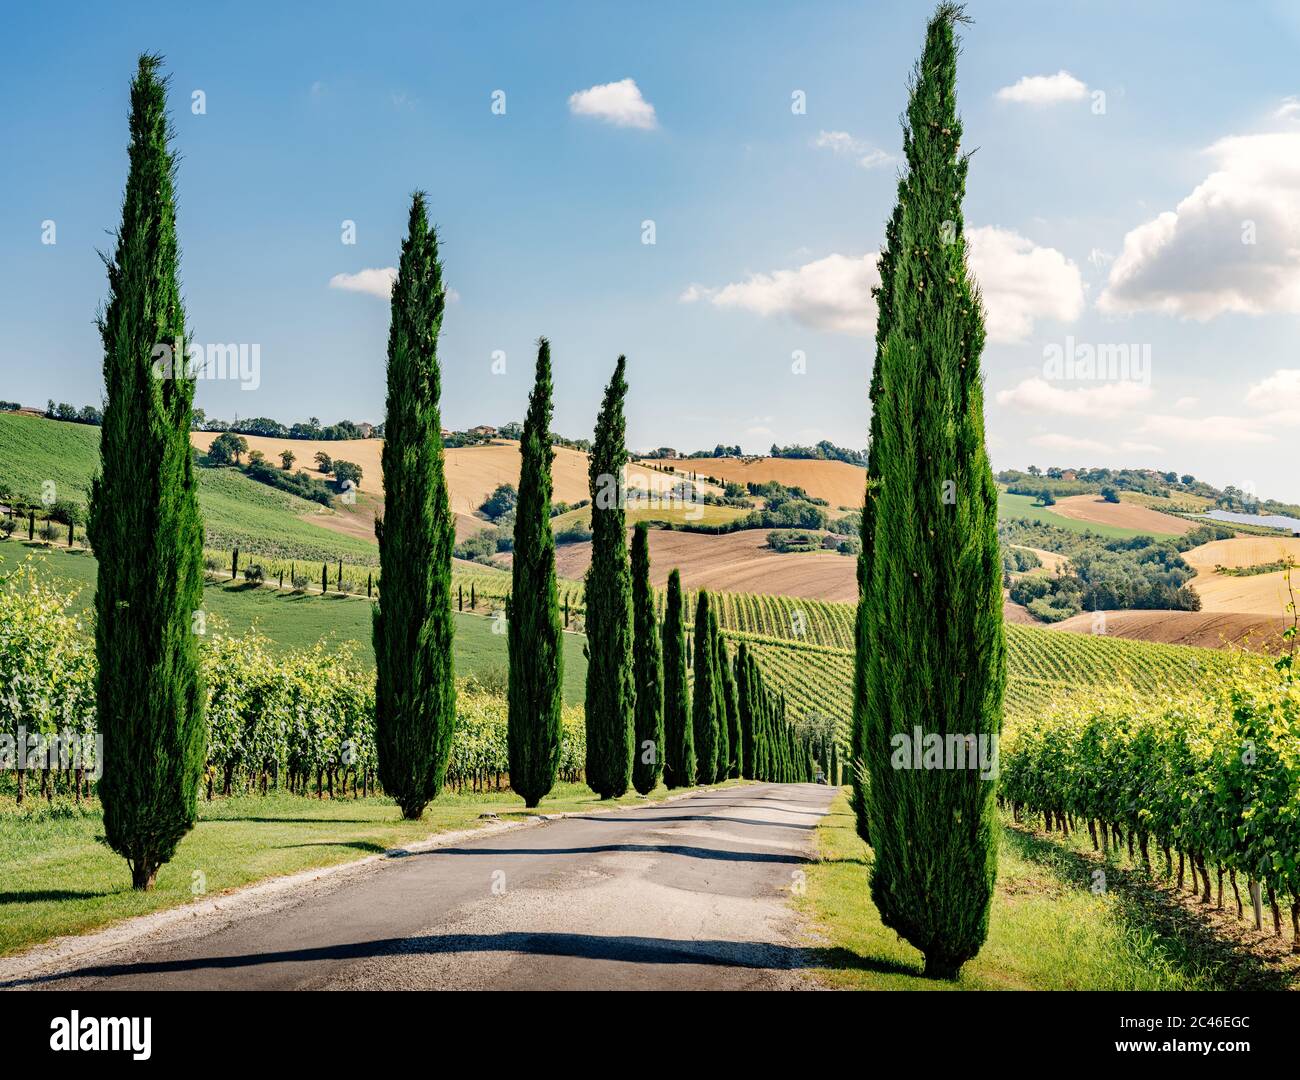 Marche Region, cultivated hills in summer, cypress trees and vineyards. Italy Stock Photo